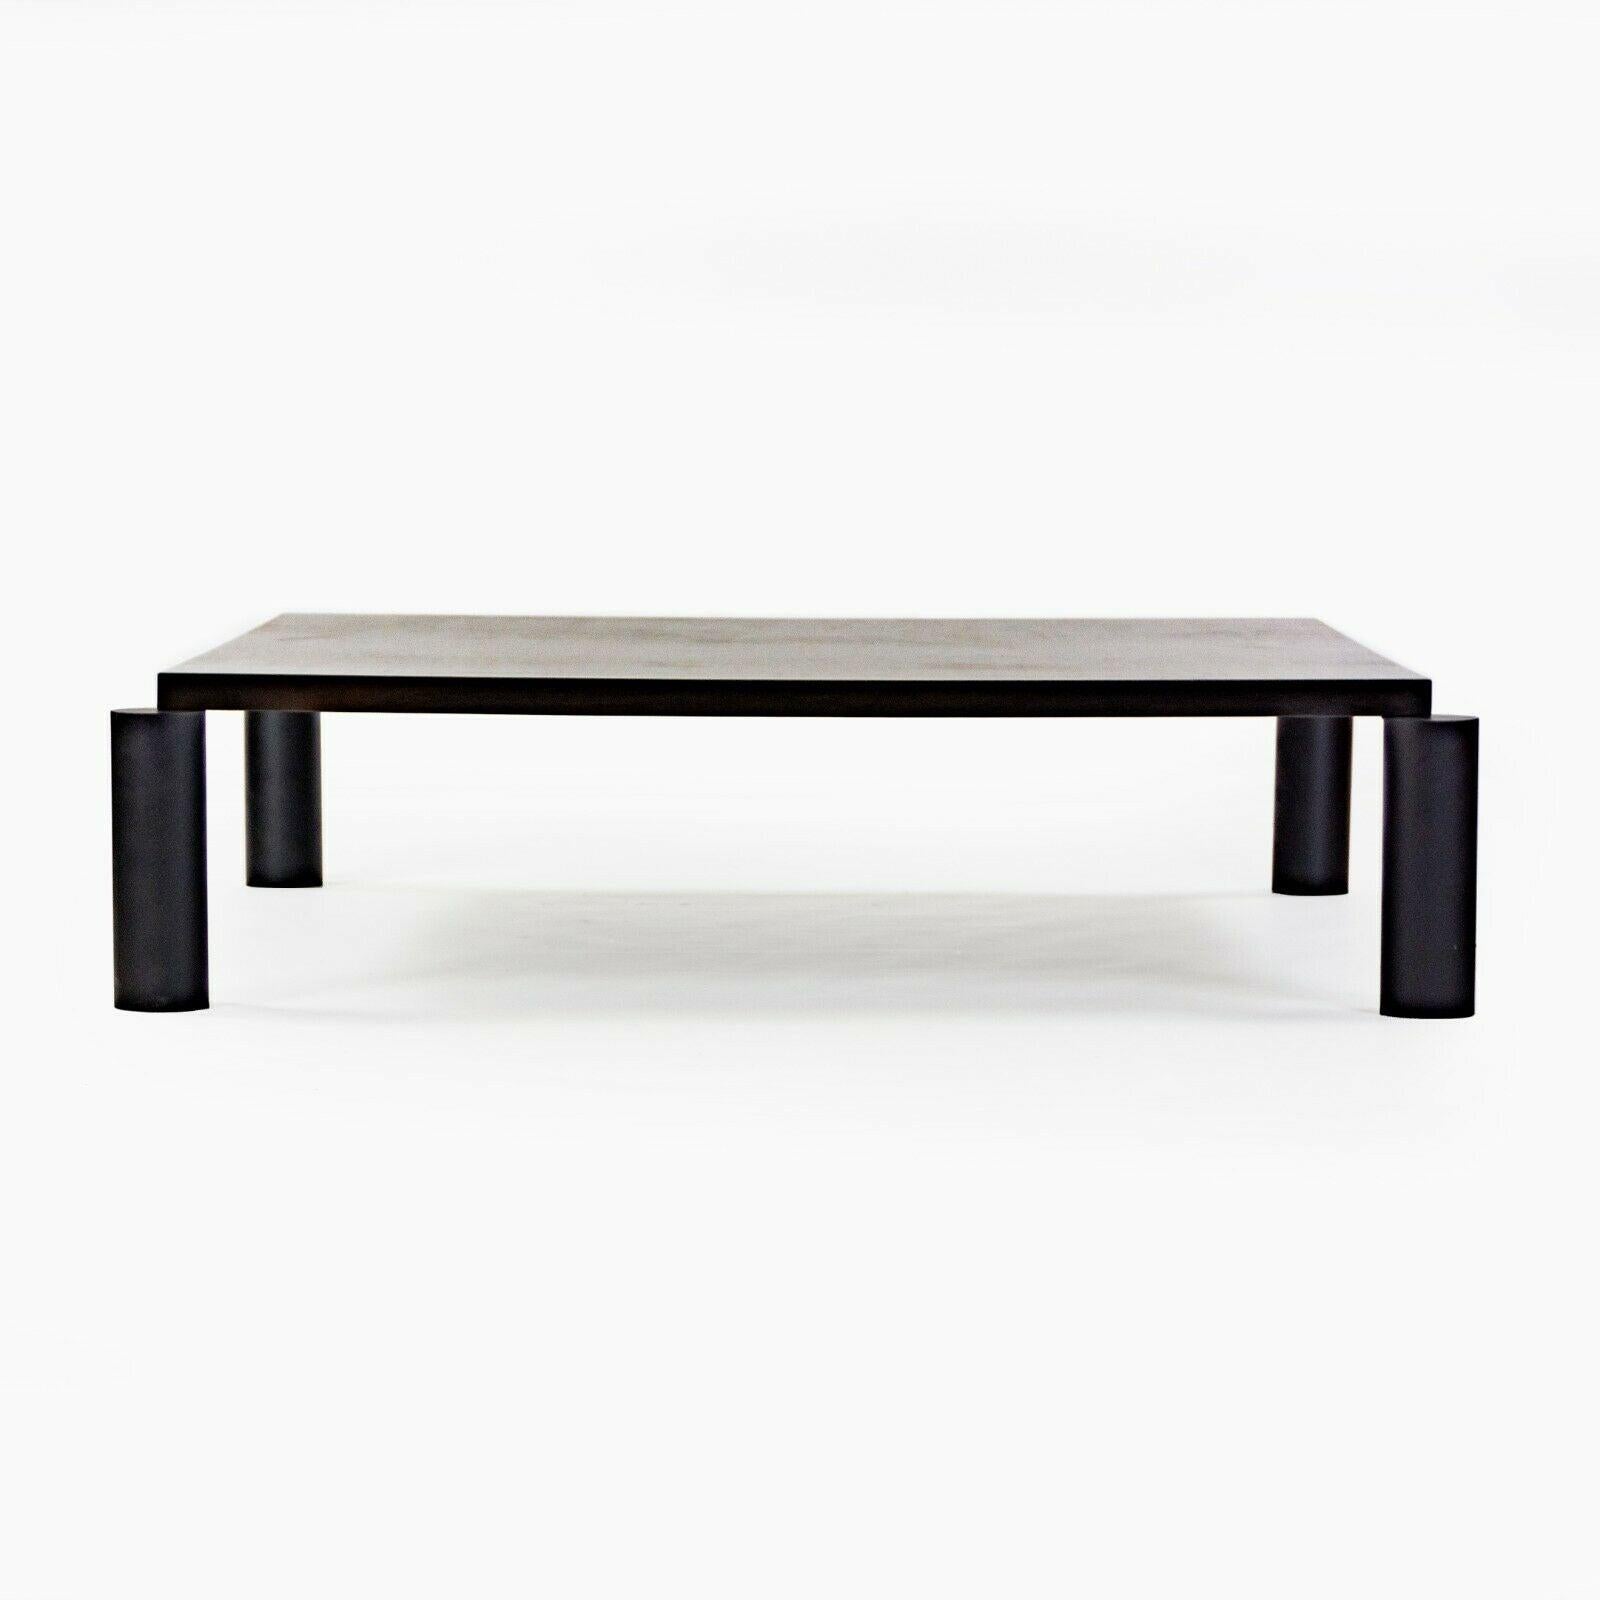 Listed for sale is a Richard Schultz prototype coffee table, designed for Conde House, circa 1985. For many decades, this was used as Richard Schultz and his family's coffee table in their home. It is signed by Richard Schultz underneath as shown.